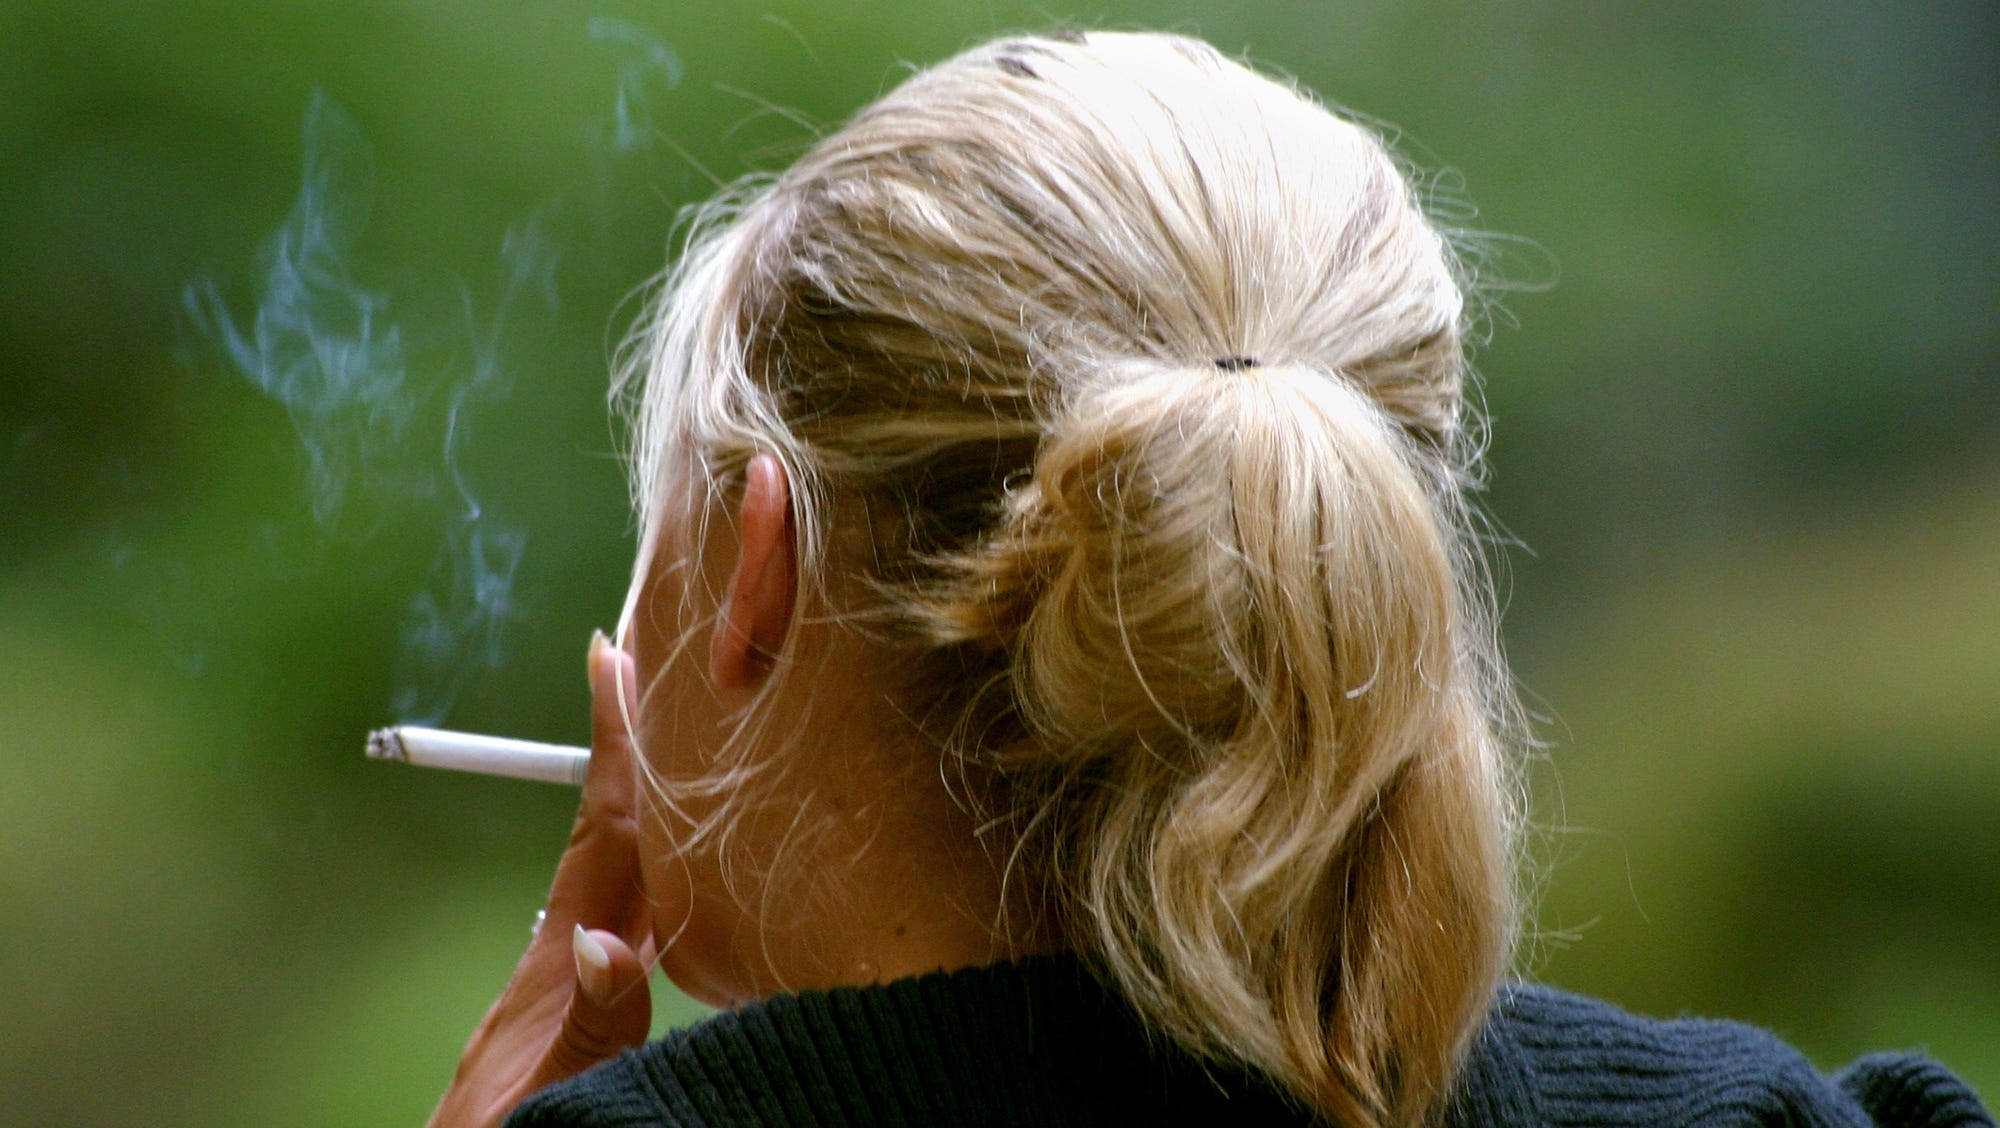 Study: Smoking shortens life span by at least 10 years